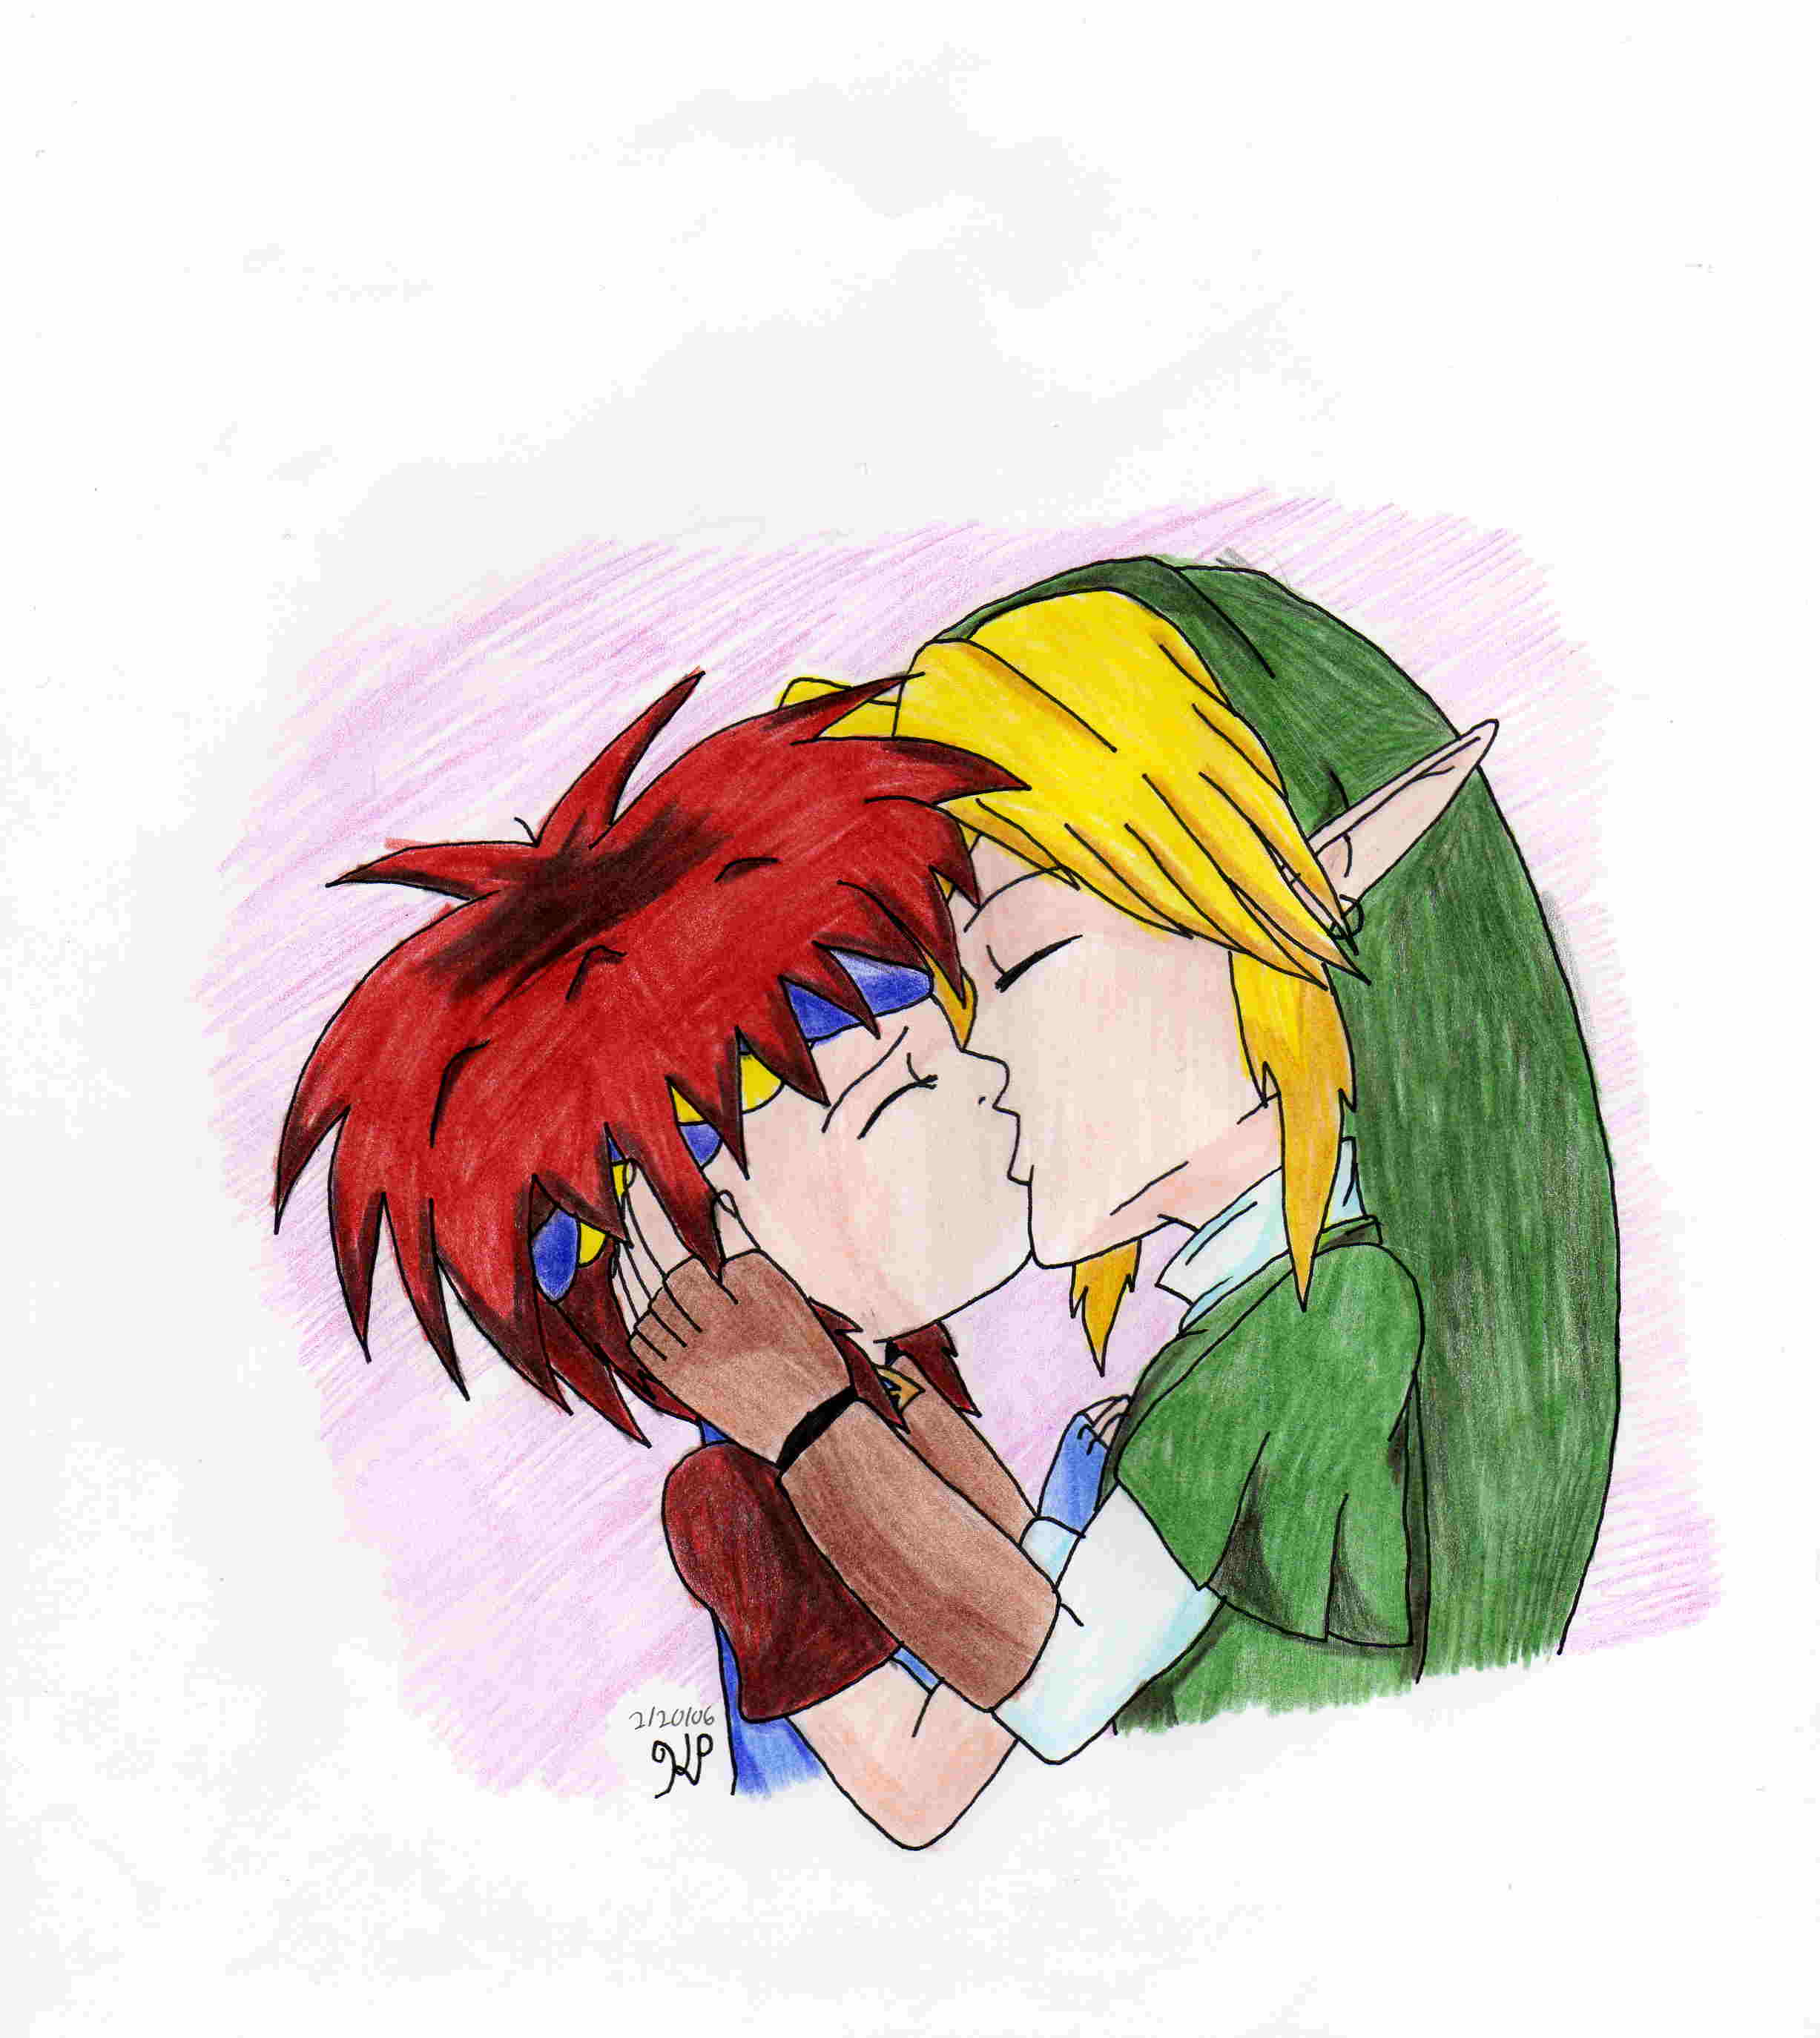 Kiss- Link and Roy by Nintendo_Nut